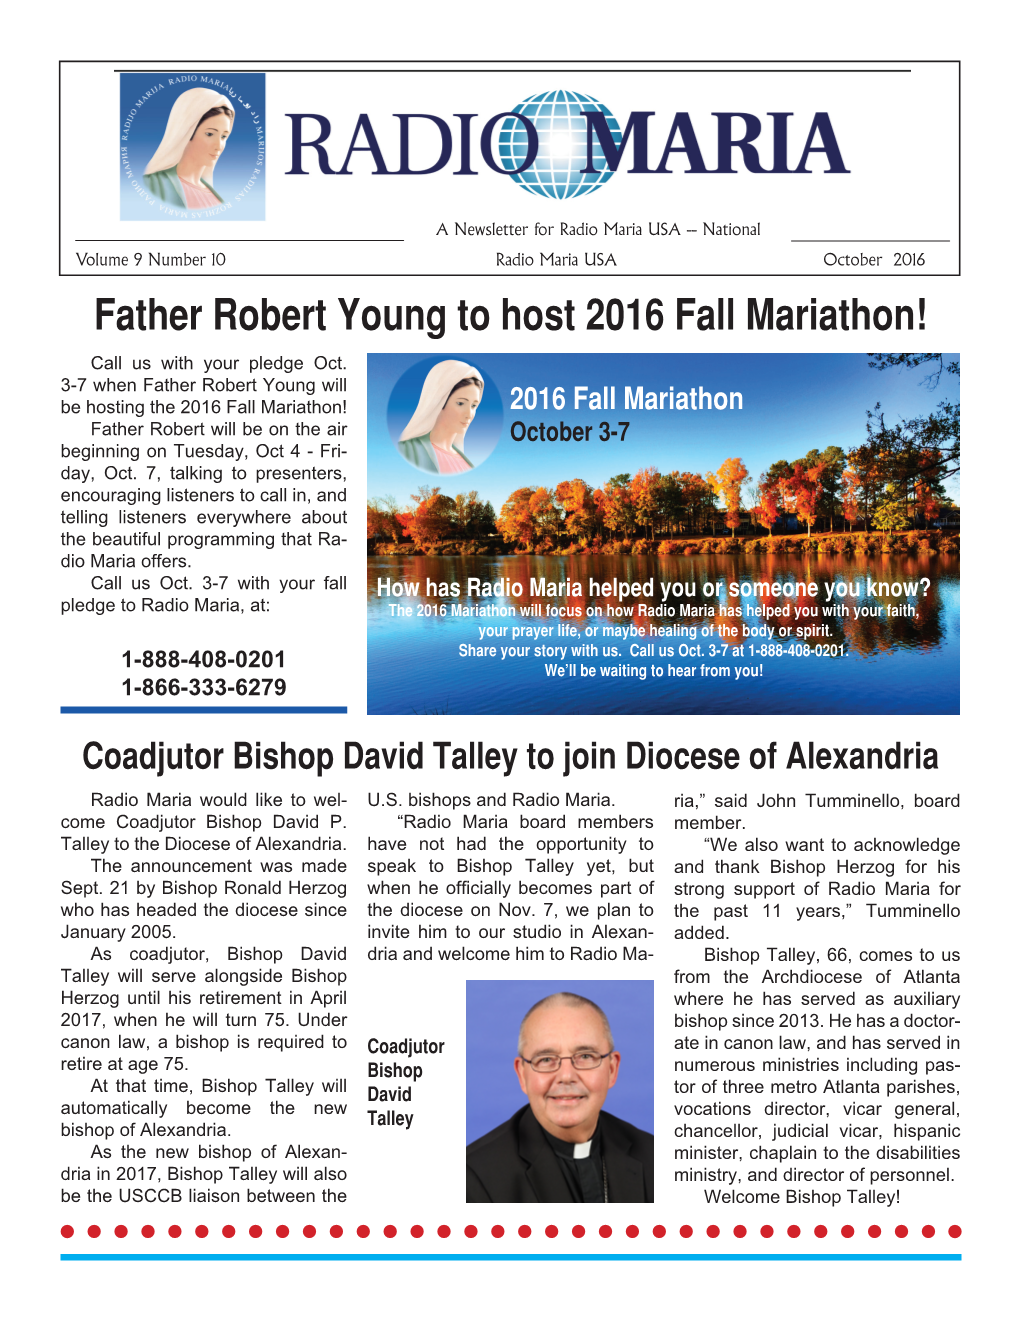 Father Robert Young to Host 2016 Fall Mariathon! Call Us with Your Pledge Oct